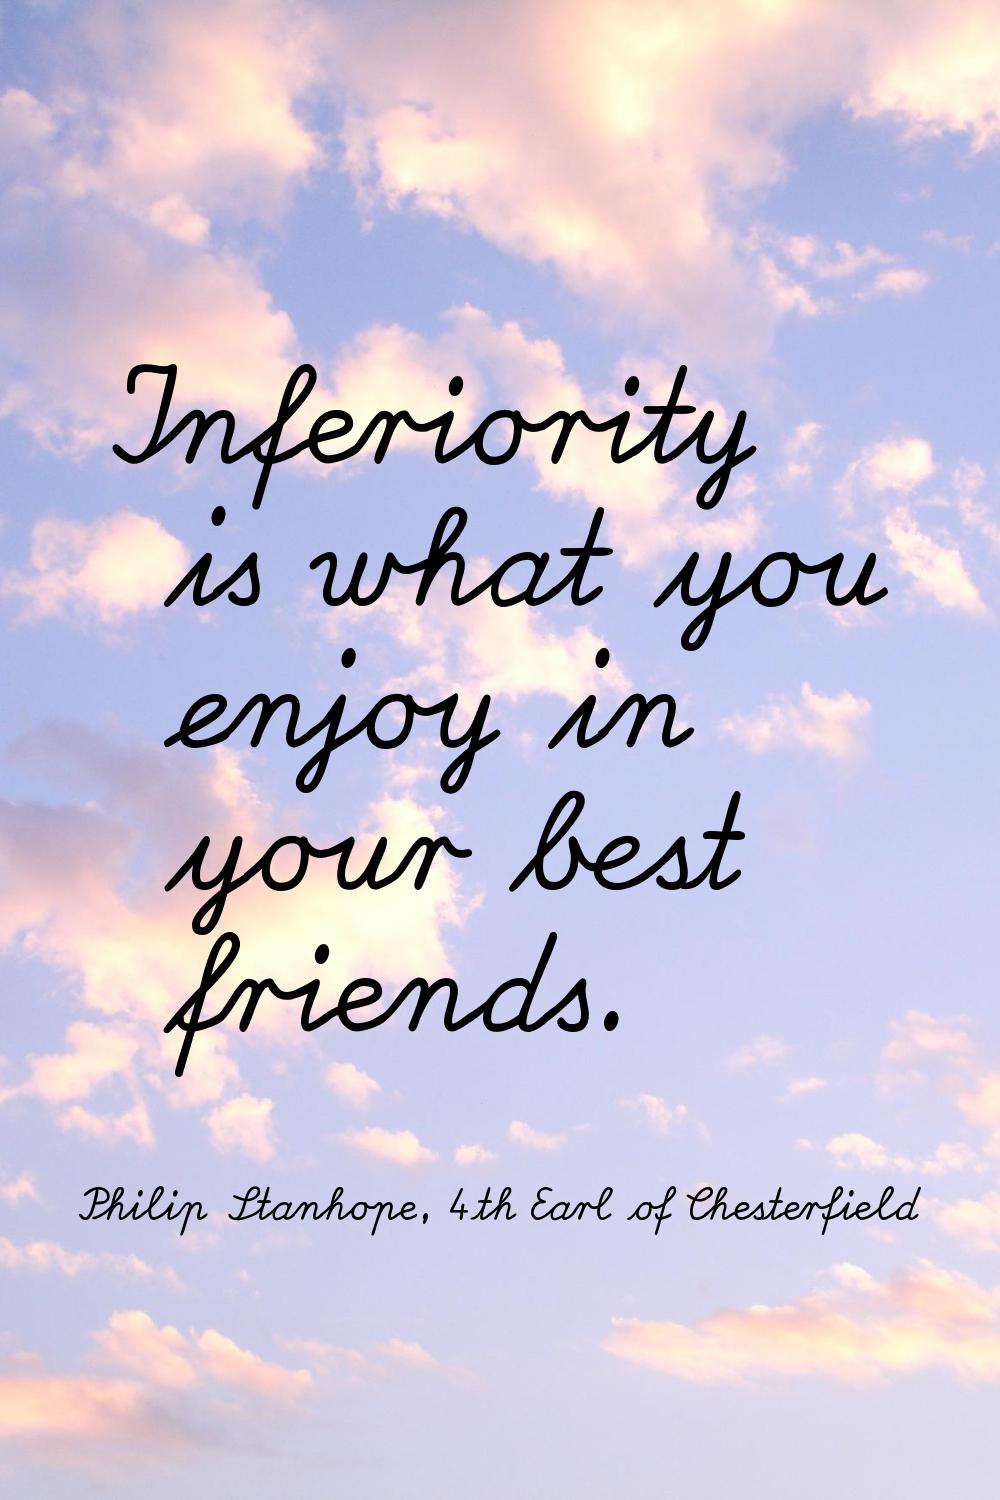 Inferiority is what you enjoy in your best friends.